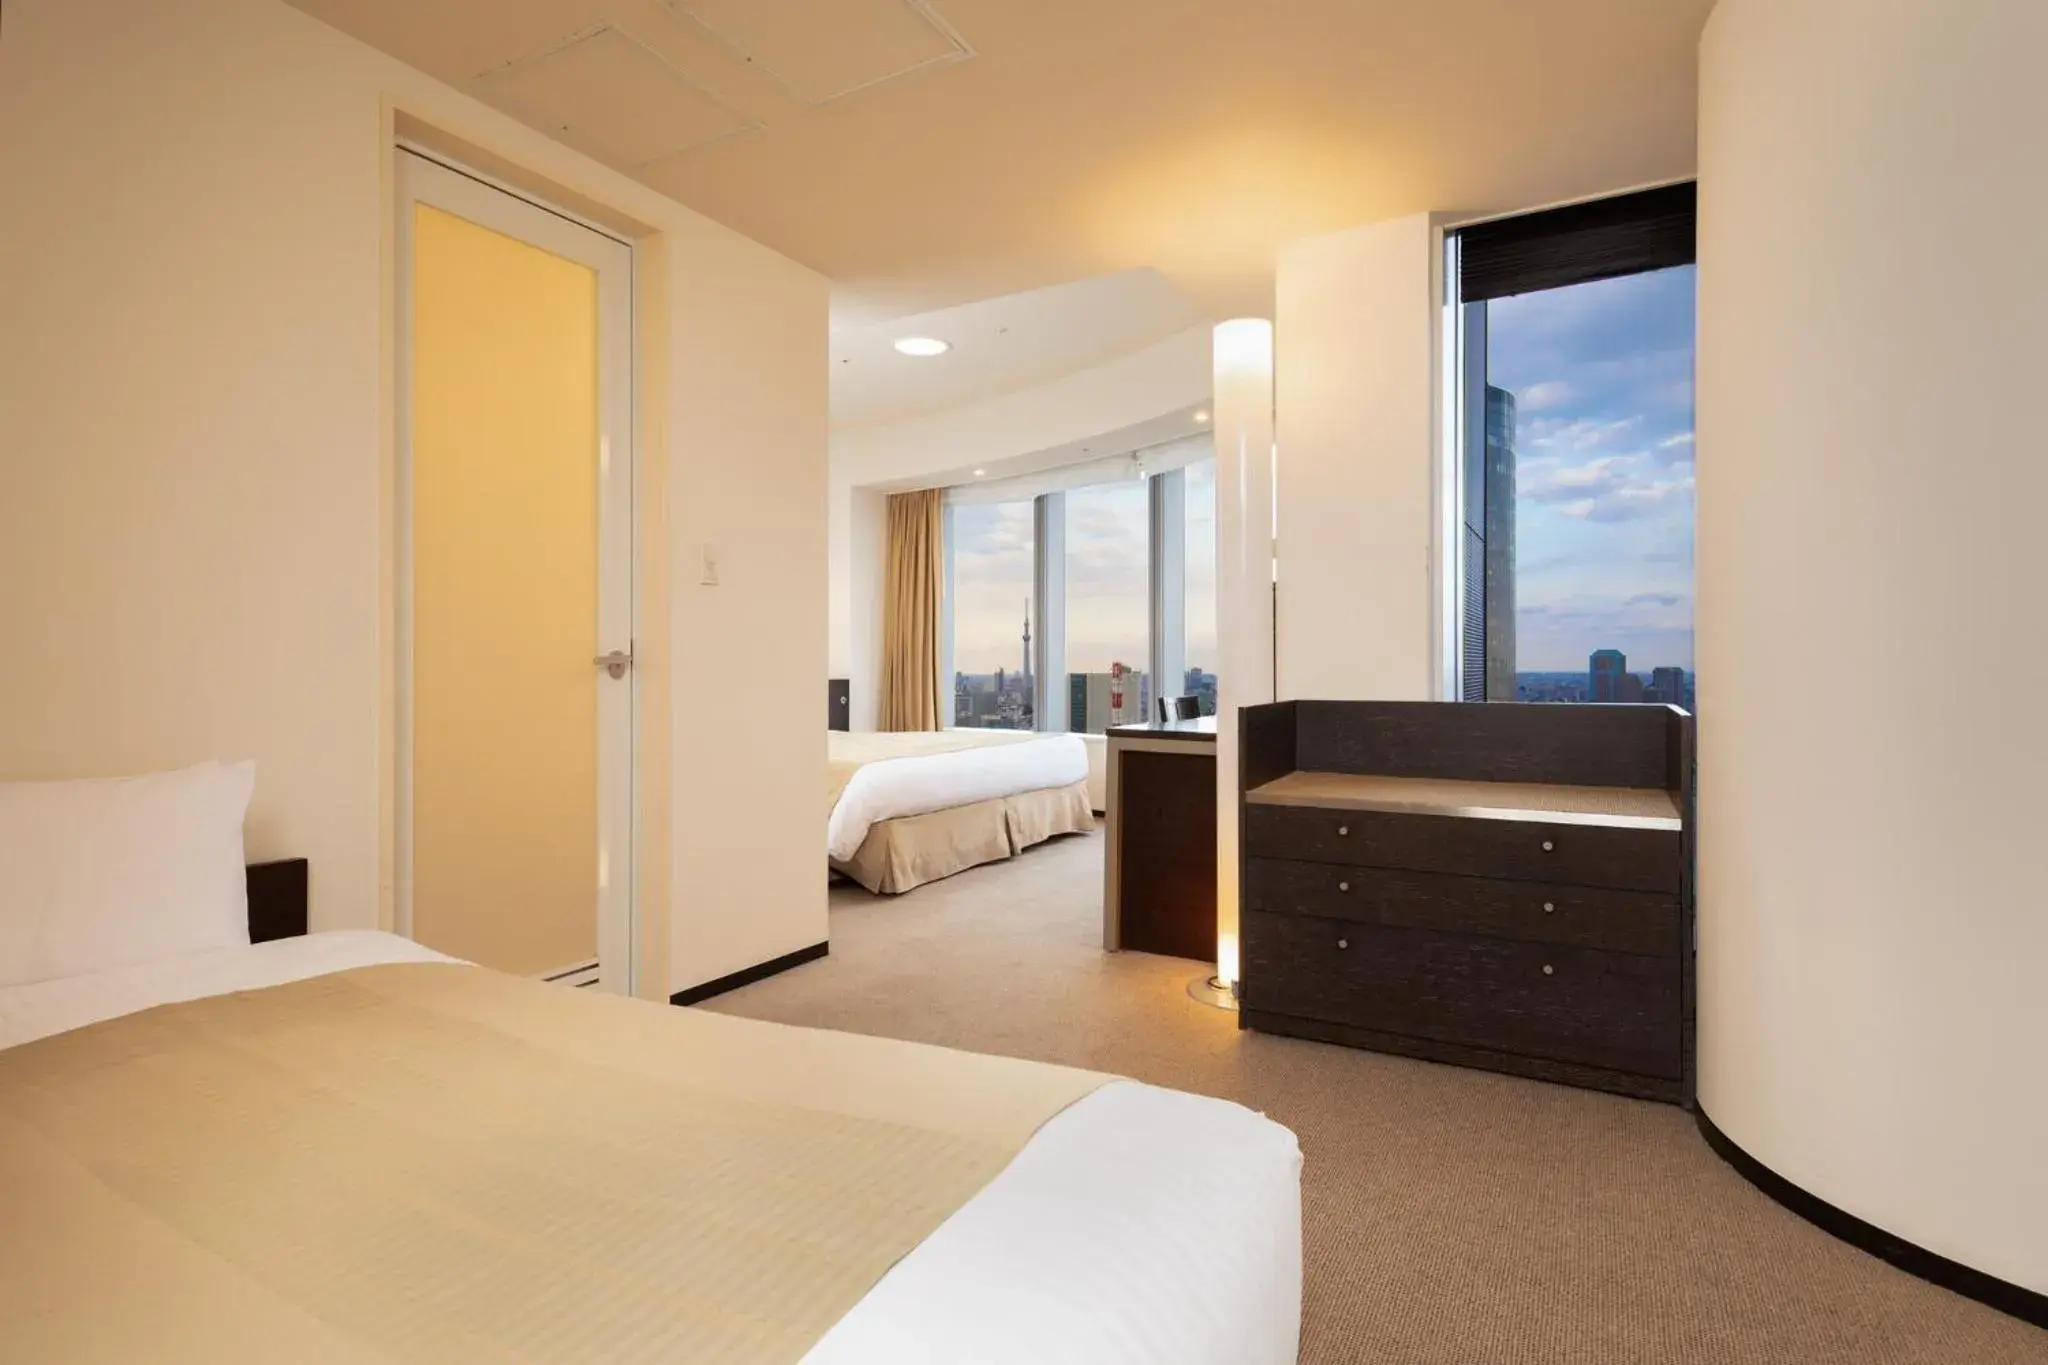 Deluxe Triple Room with 1 King Bed and 1 Sofa Bed - single occupancy - Above 27th floor - Non Smoking in Park Hotel Tokyo